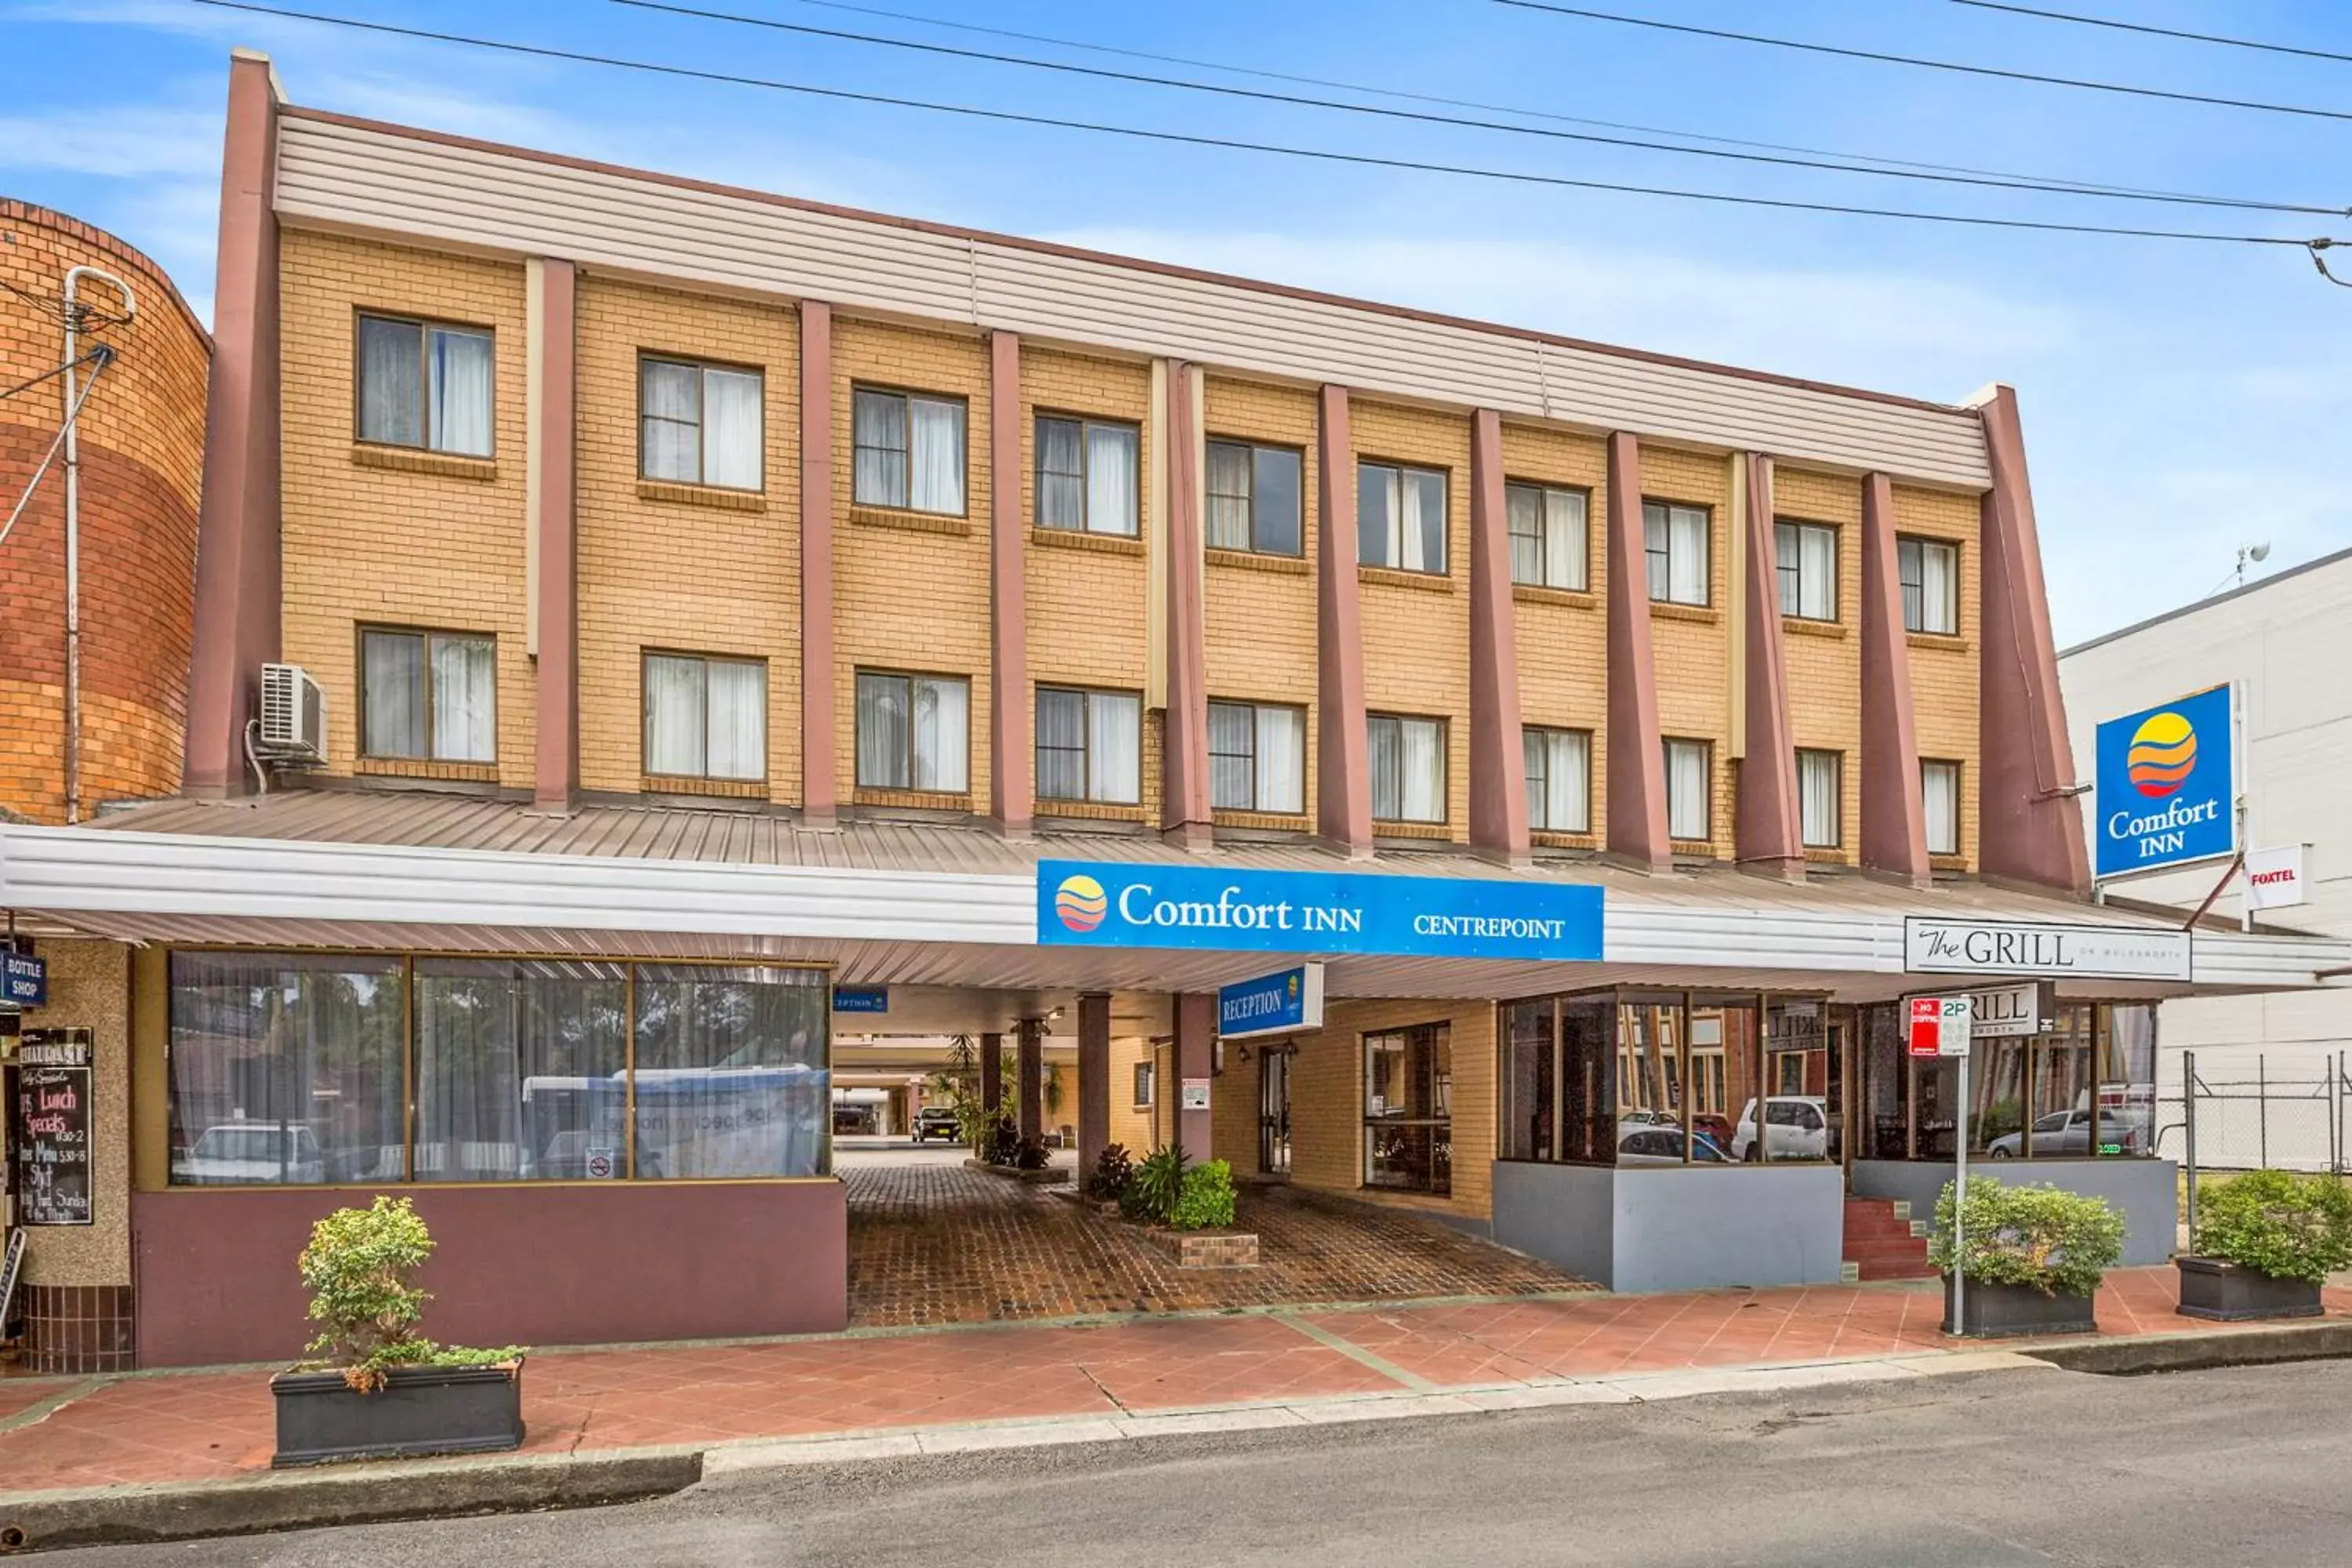 Facade/entrance, Property Building in Comfort Inn Centrepoint Motel